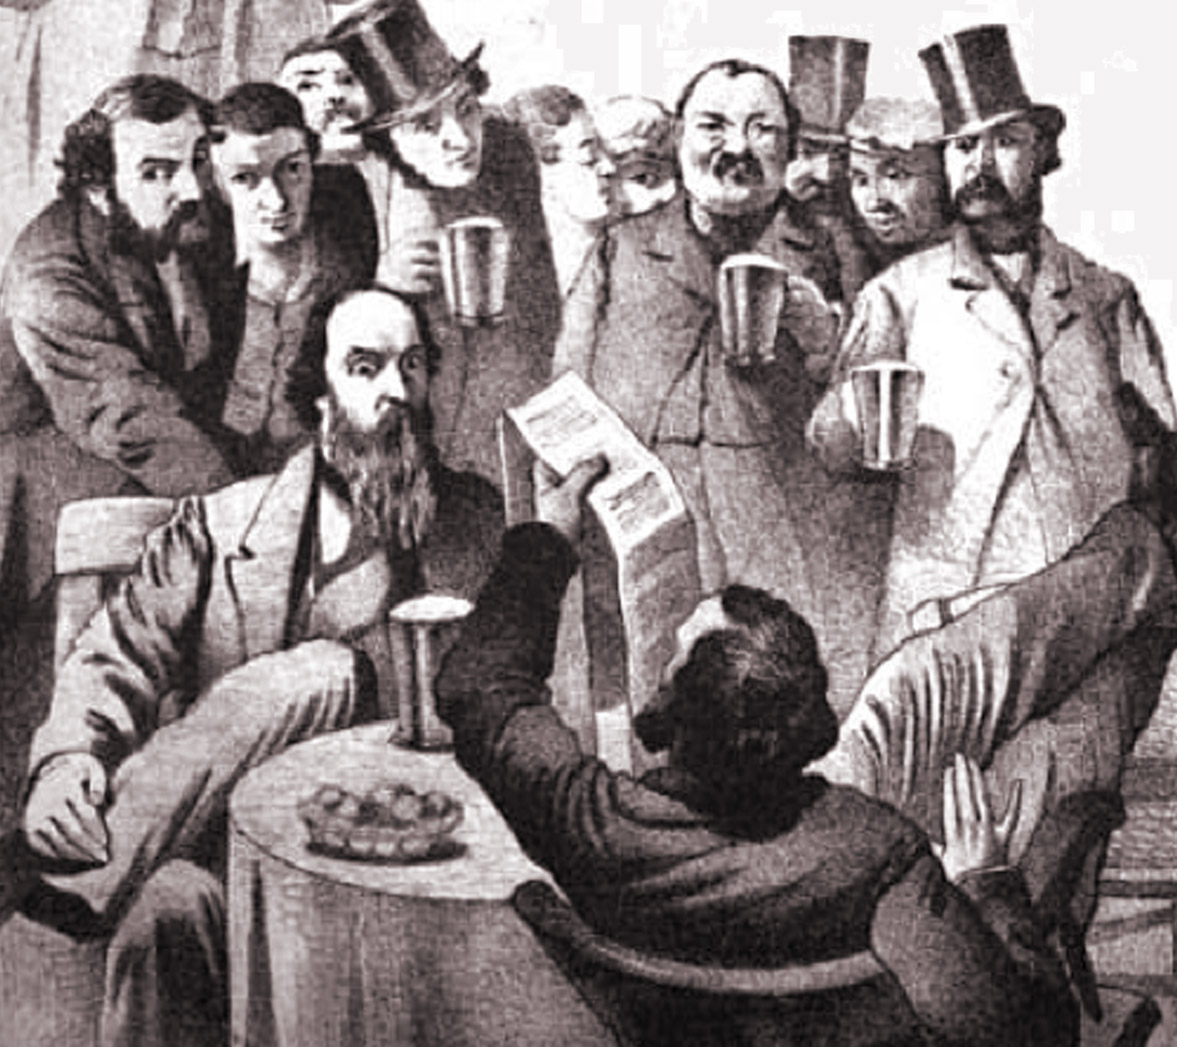 A group of Victorian men drinking in an old pub.